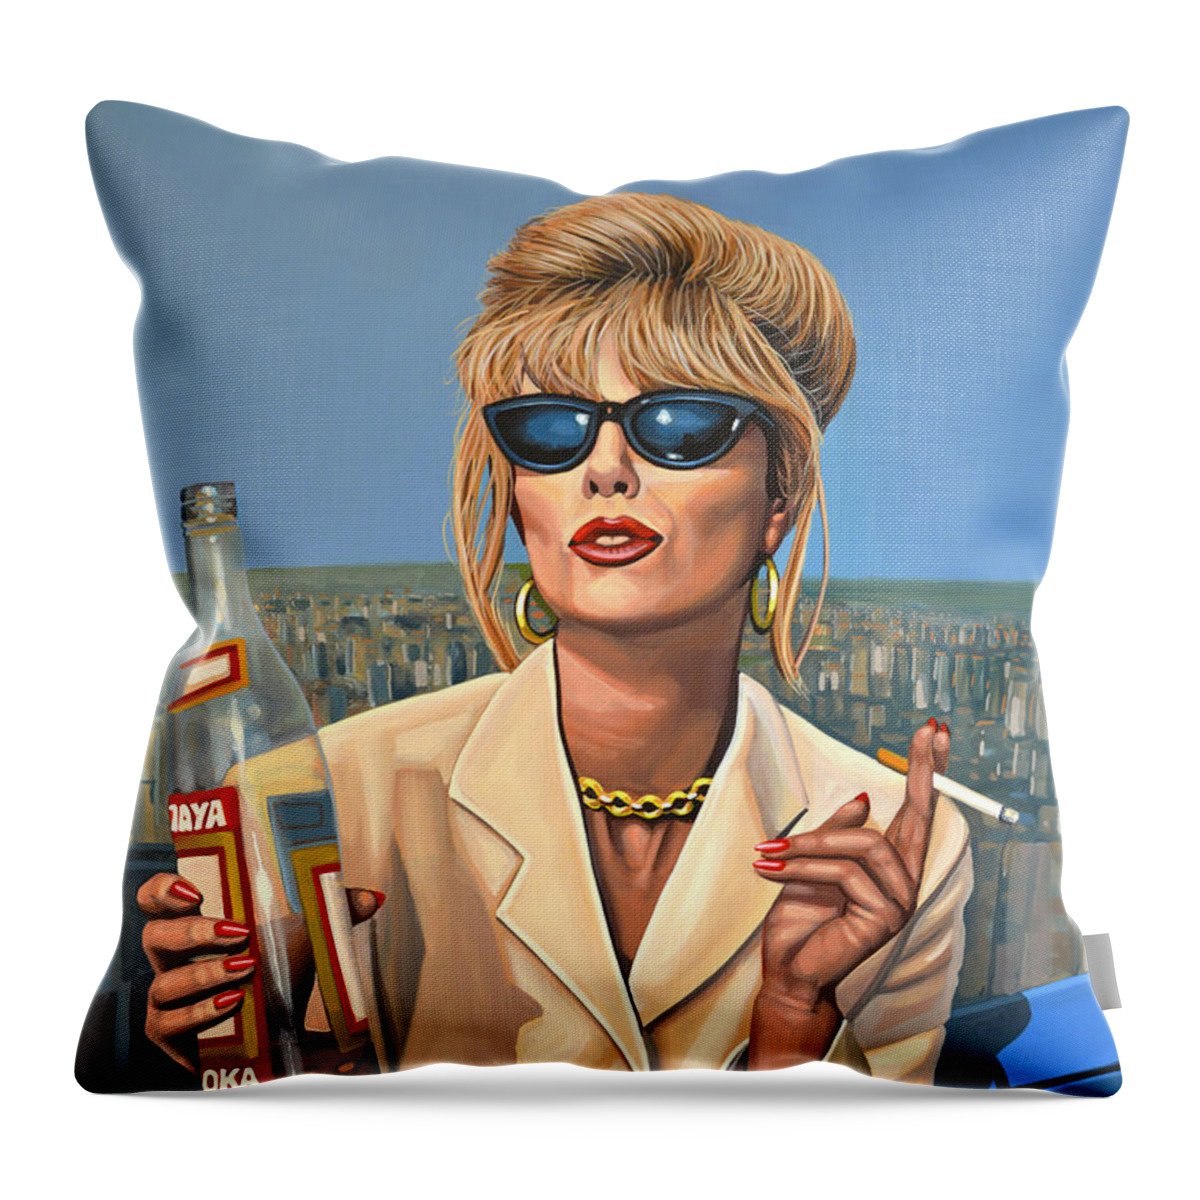 Joanna Lumley Throw Pillow featuring the painting Joanna Lumley as Patsy Stone by Paul Meijering